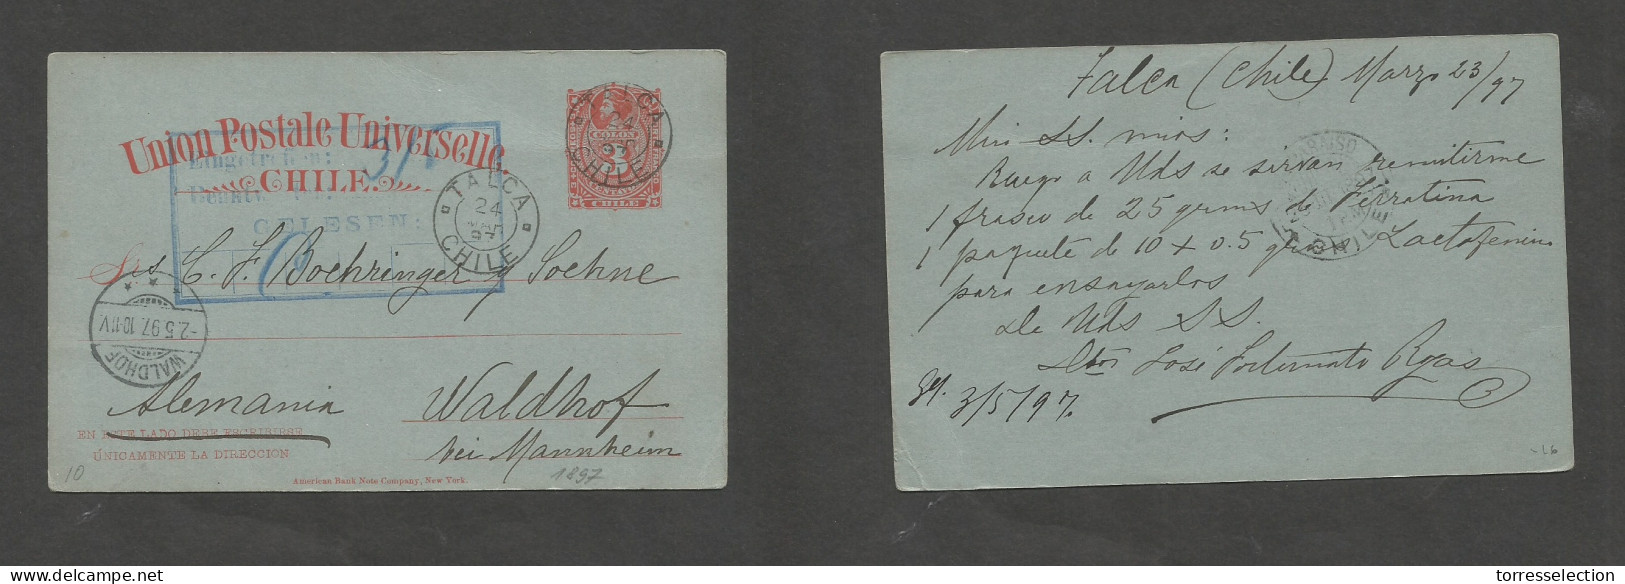 CHILE - Stationery. 1897 (23 March) Talca - Germany, Wald Hof (2 May) 3c Red, Bluish Stat Card. Fine Used. SALE. - Cile